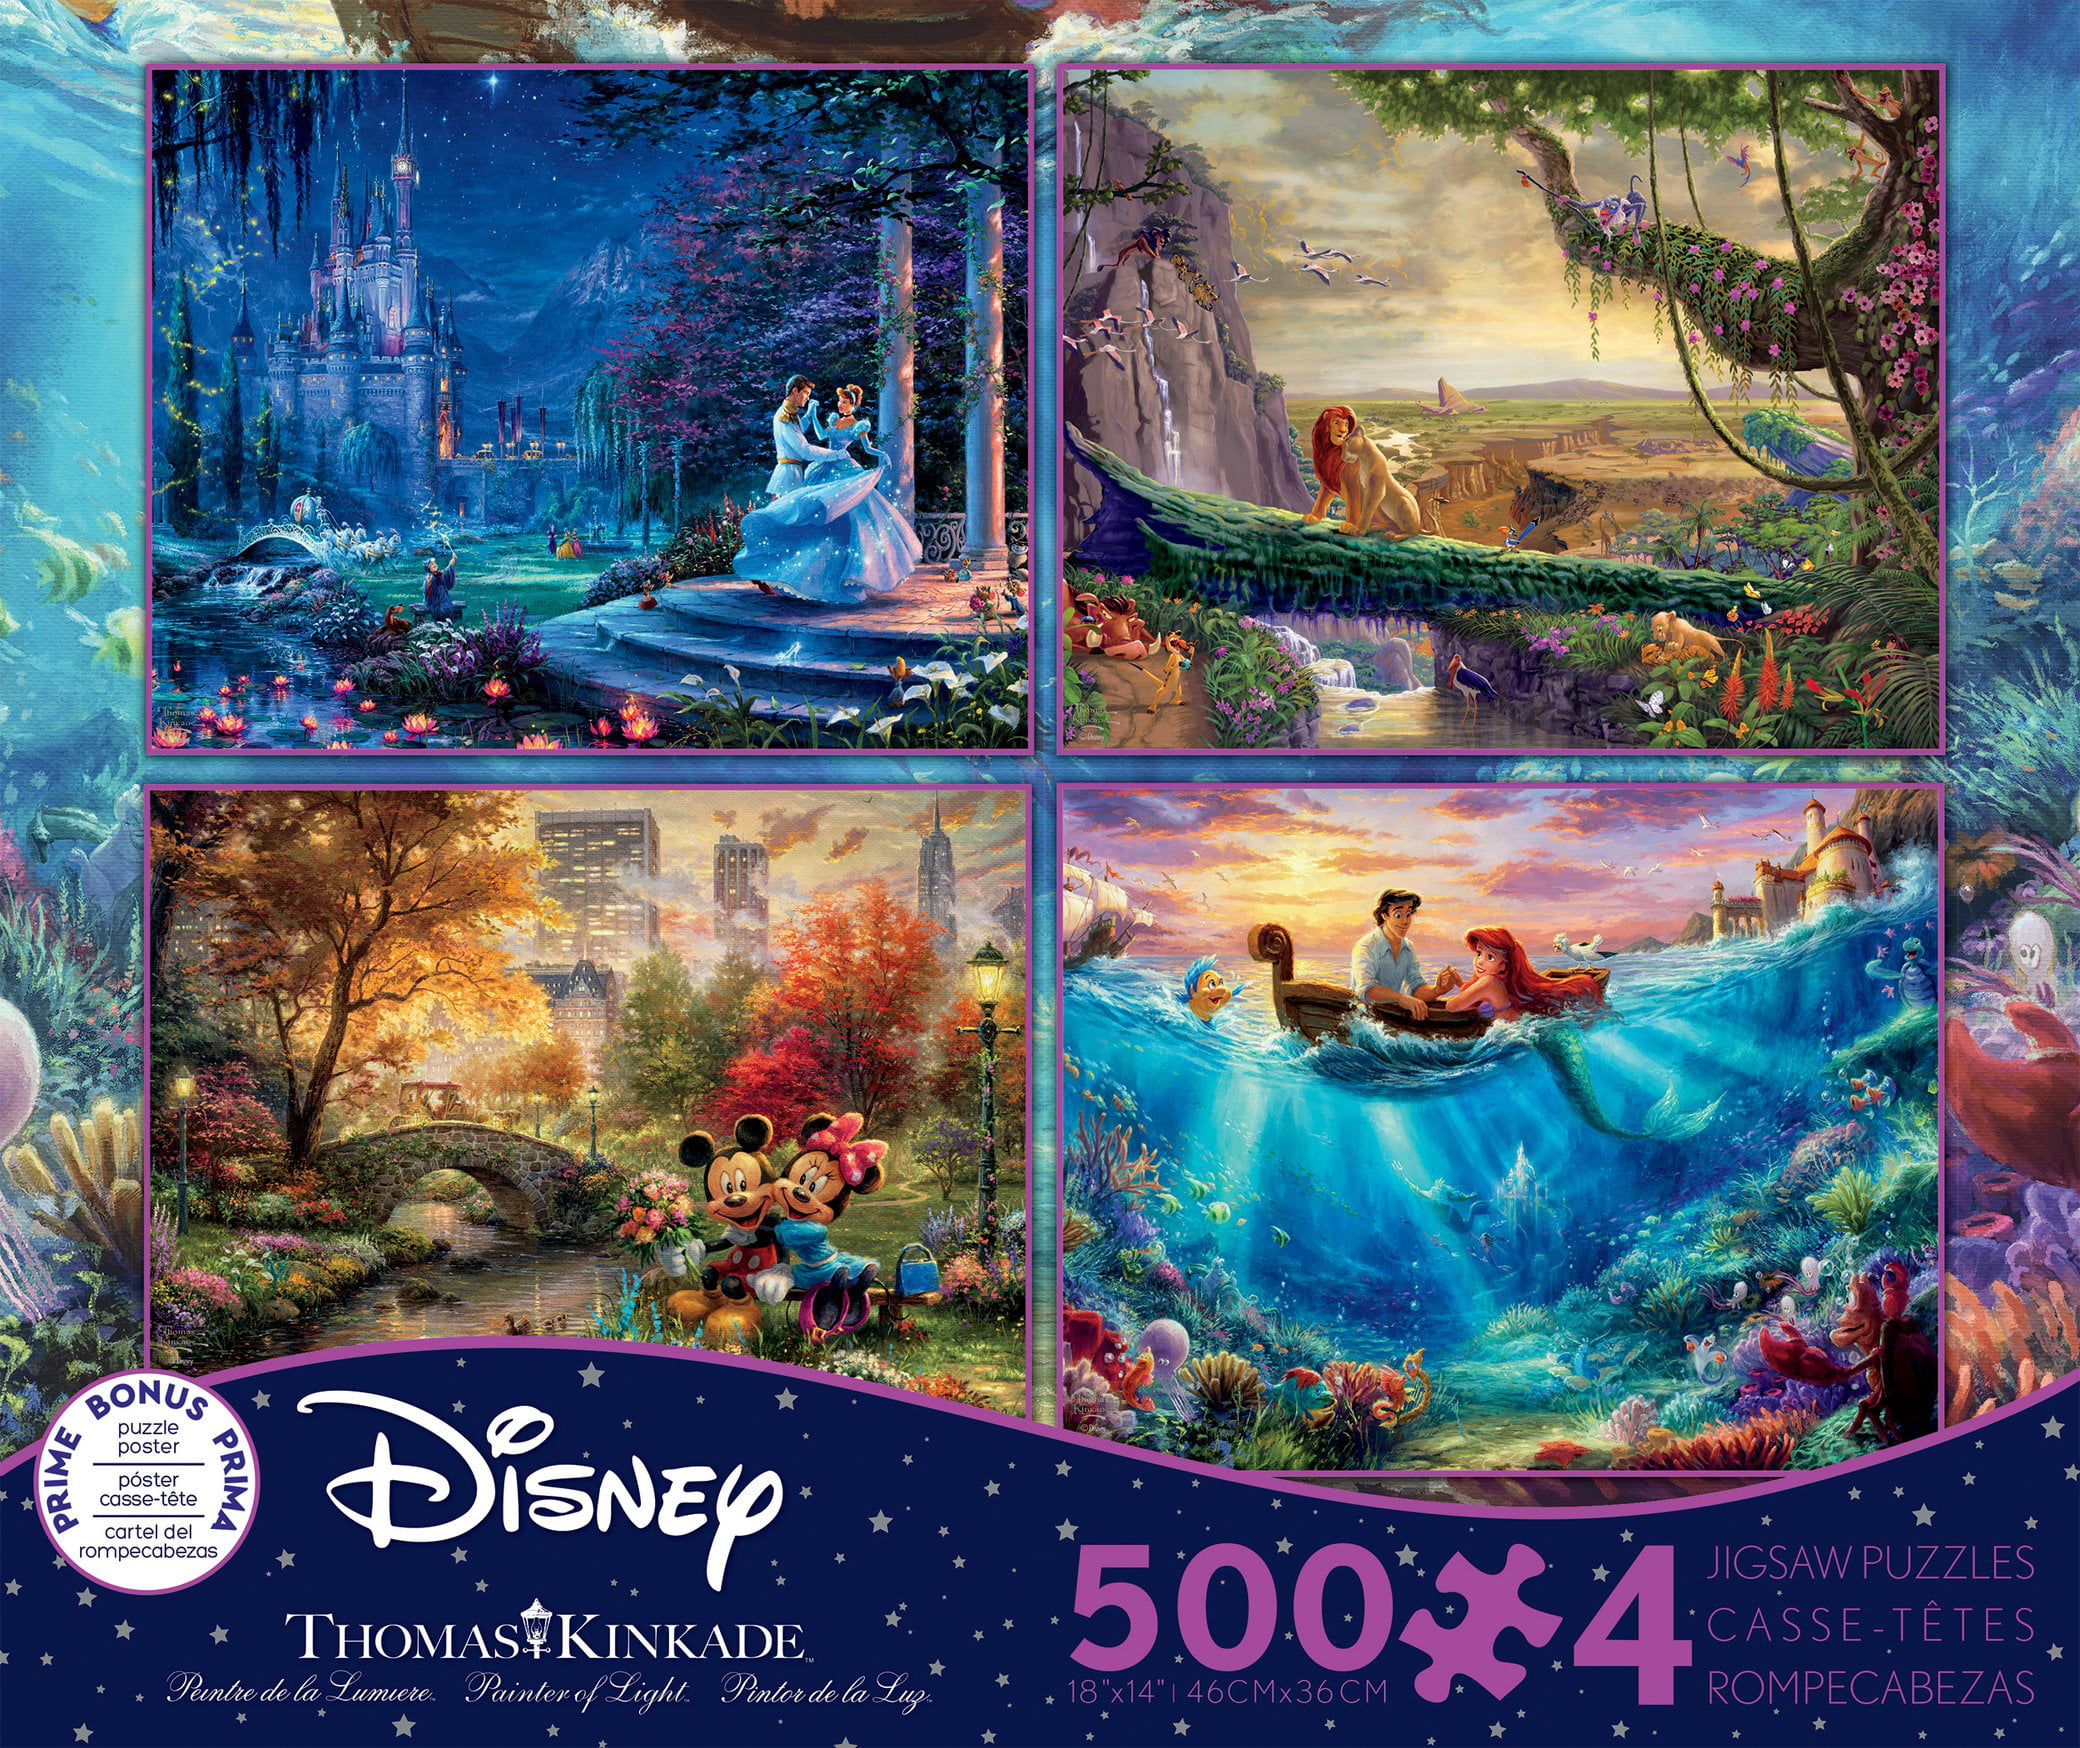 Thomas Kinkade The Disney Dreams Collection 300 PC Cinderella Puzzle 100 GUC for sale online 